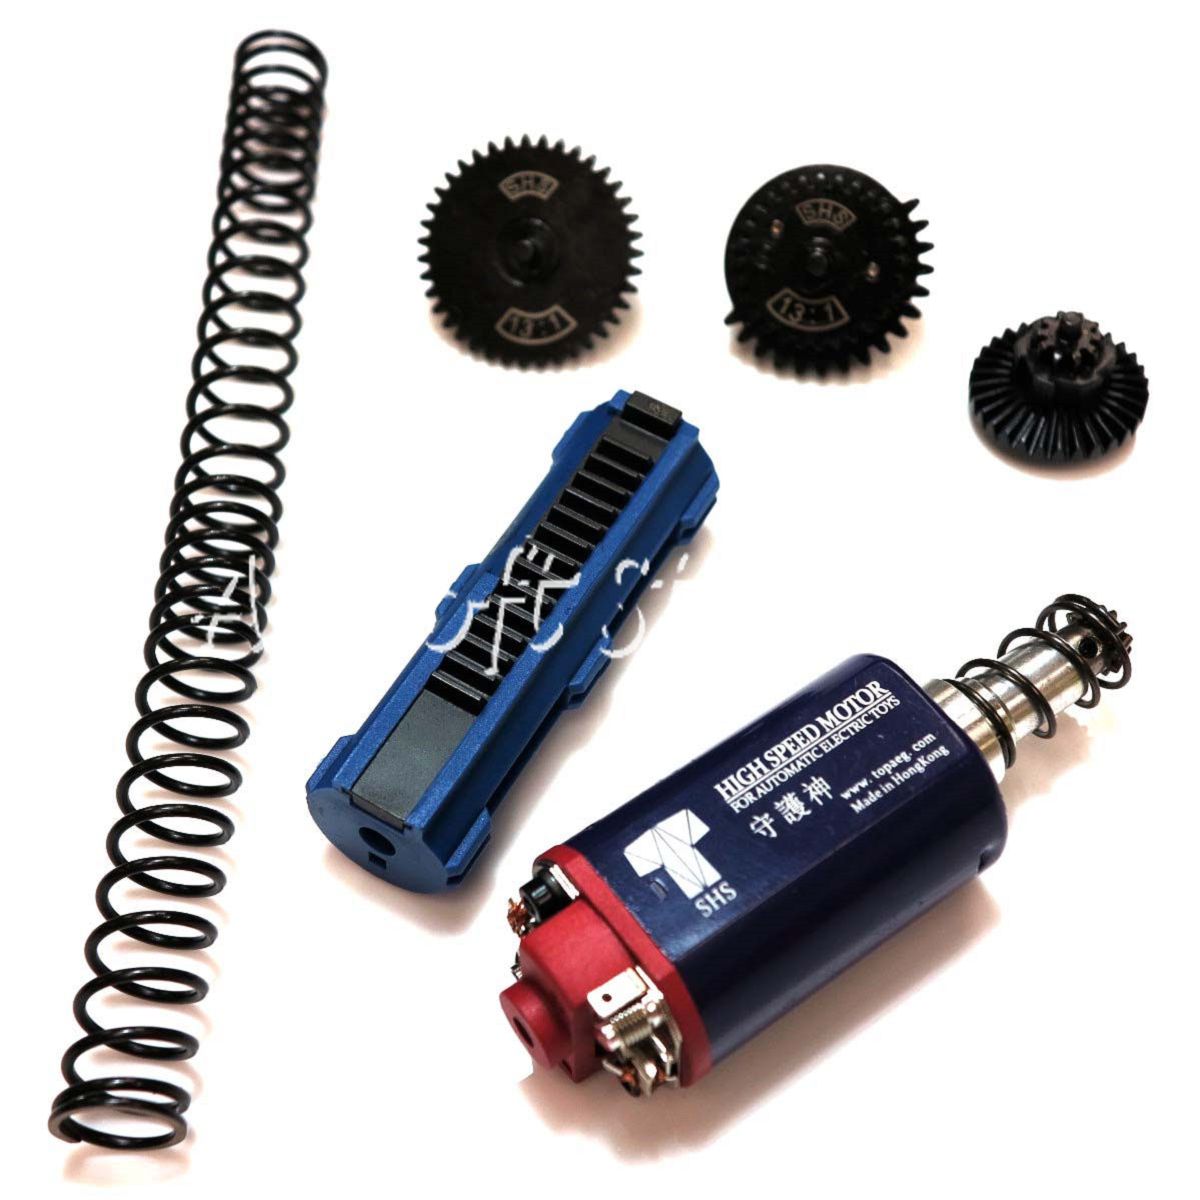 Airsoft Tactical Gear SHS-314 High Speed Motor & Gear Tune-Up Set for M4 AEG